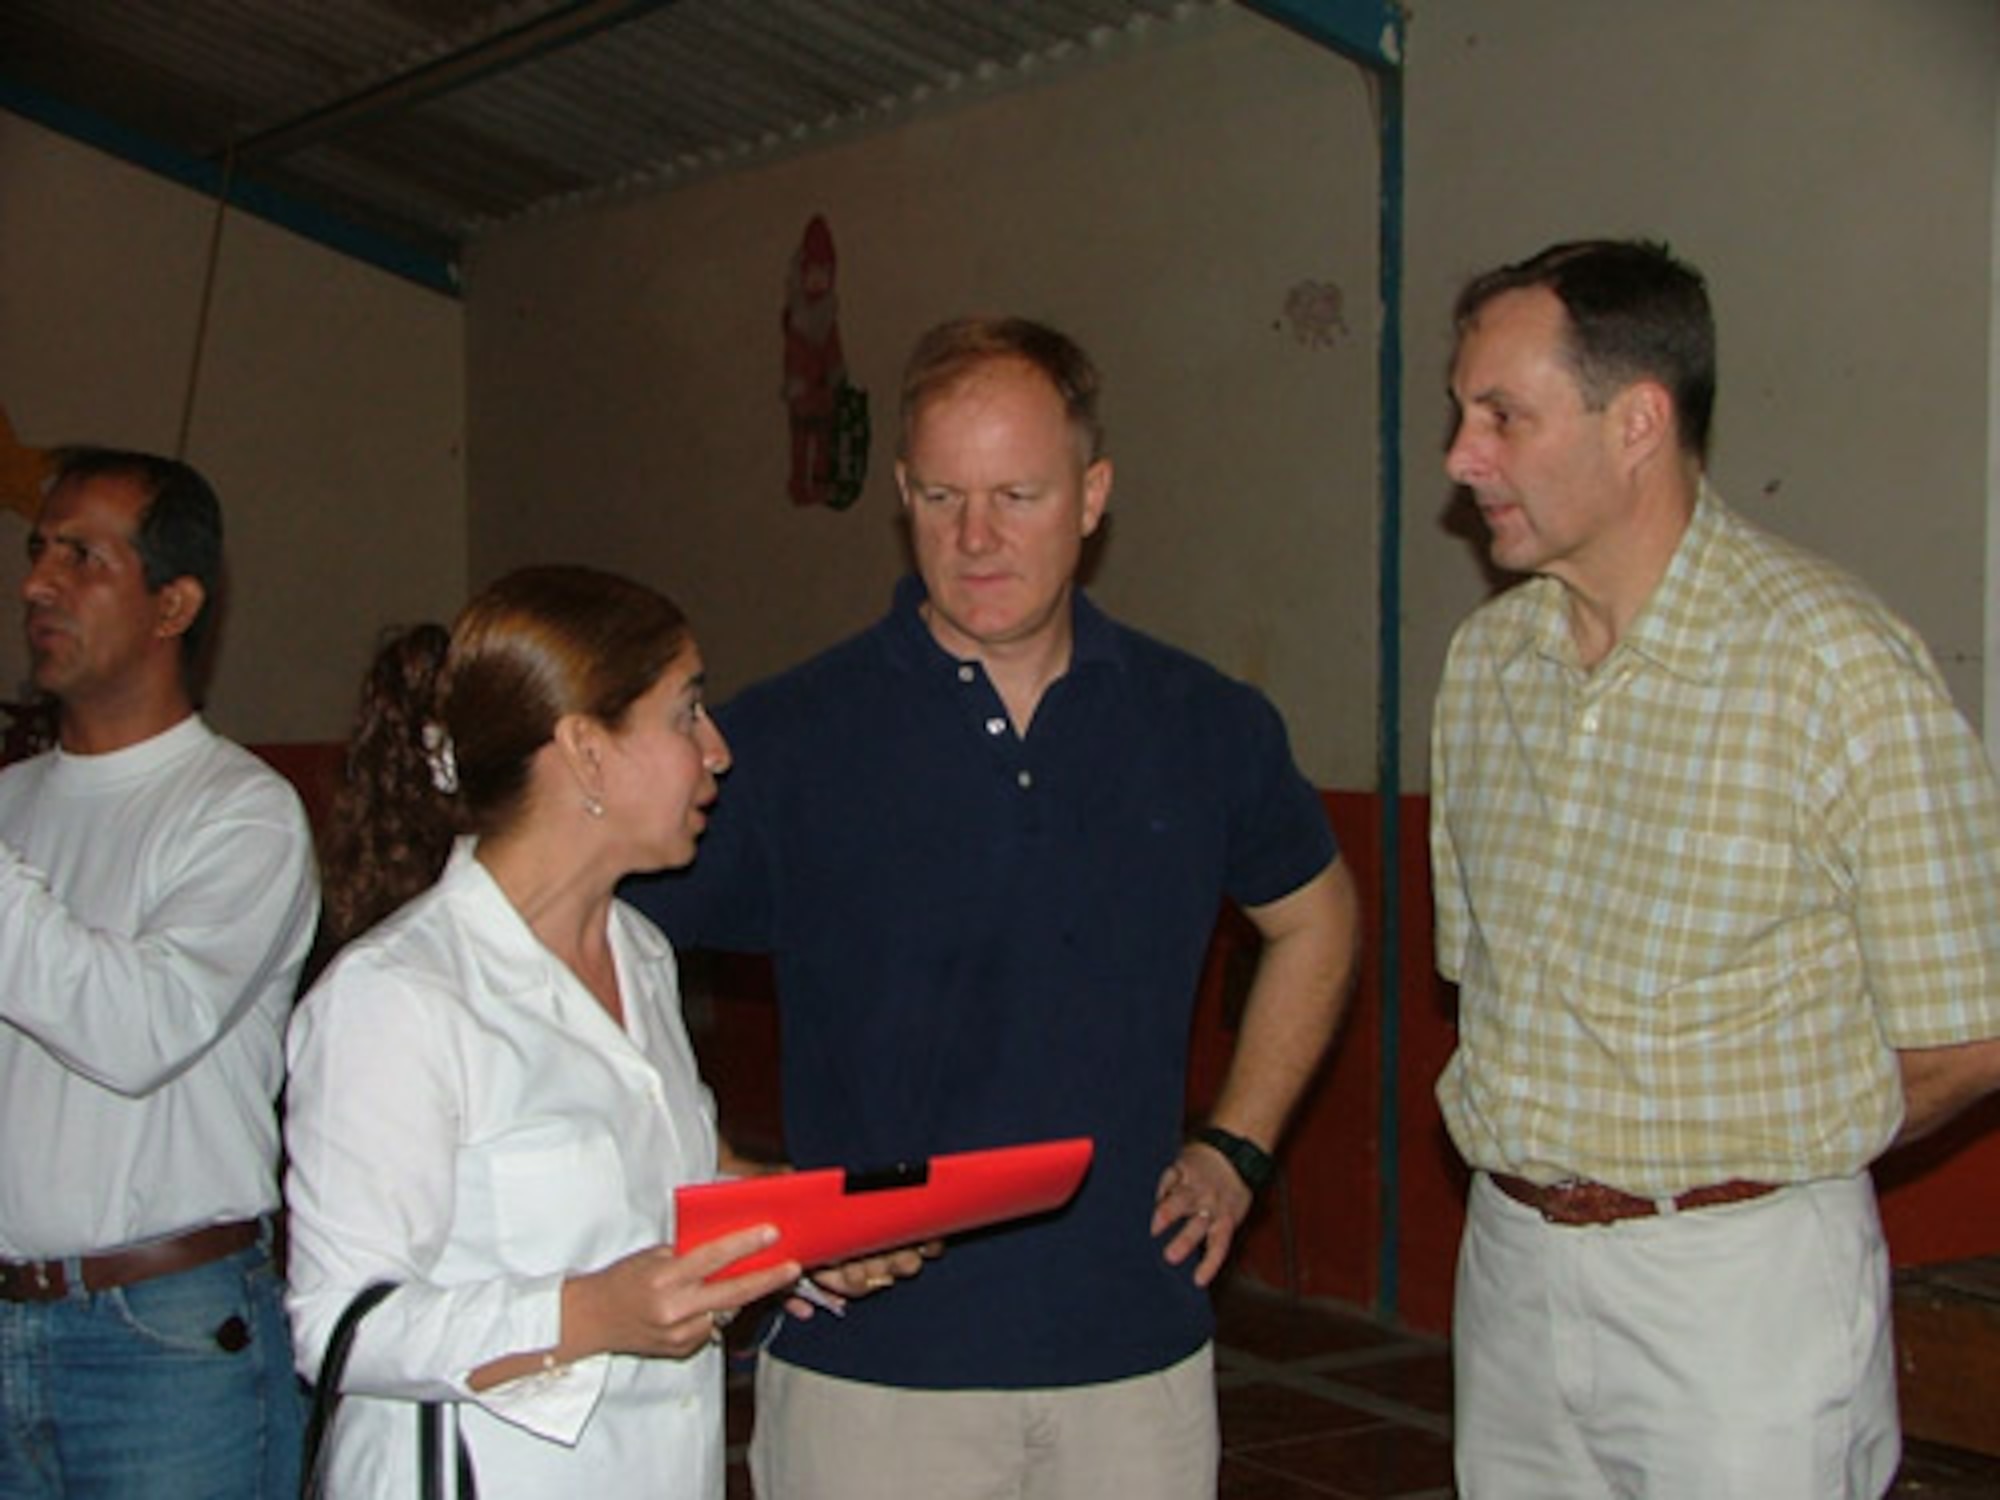 Maj. Gen. Craig Campbell, Alaska State Adjutant General, and Lt. Col. Mark Dewey, 168th Air Refueling Wing detachment commander, talk with Dra. Mayra Velez Lopez, while visiting Comedor De Divino Niños, which is a “soup kitchen” in Manta, Ecuador.  Earlier, Maj. Gen. Campbell presented Dra. Lopez with a pledge for $405 to buy two doors and three windows for the soup kitchen. (U.S. Air Force photo/1st Lt. Malinda Singleton)